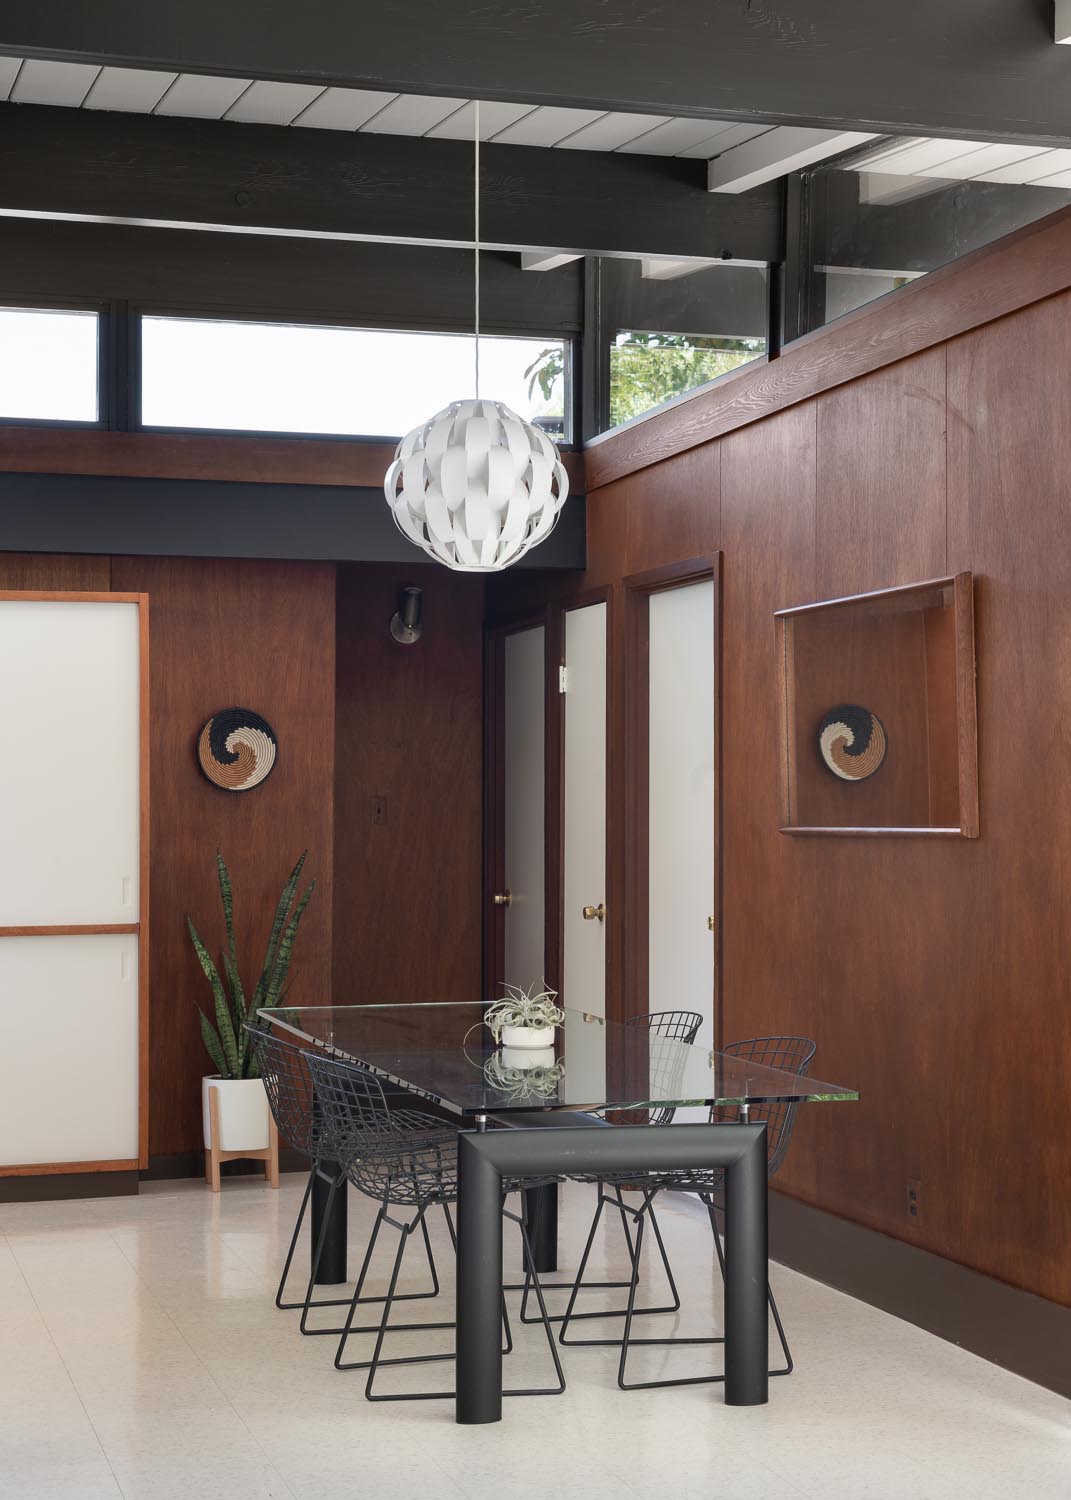 The restoration of an Eichler home included keeping the wood panel walls in the dining area.